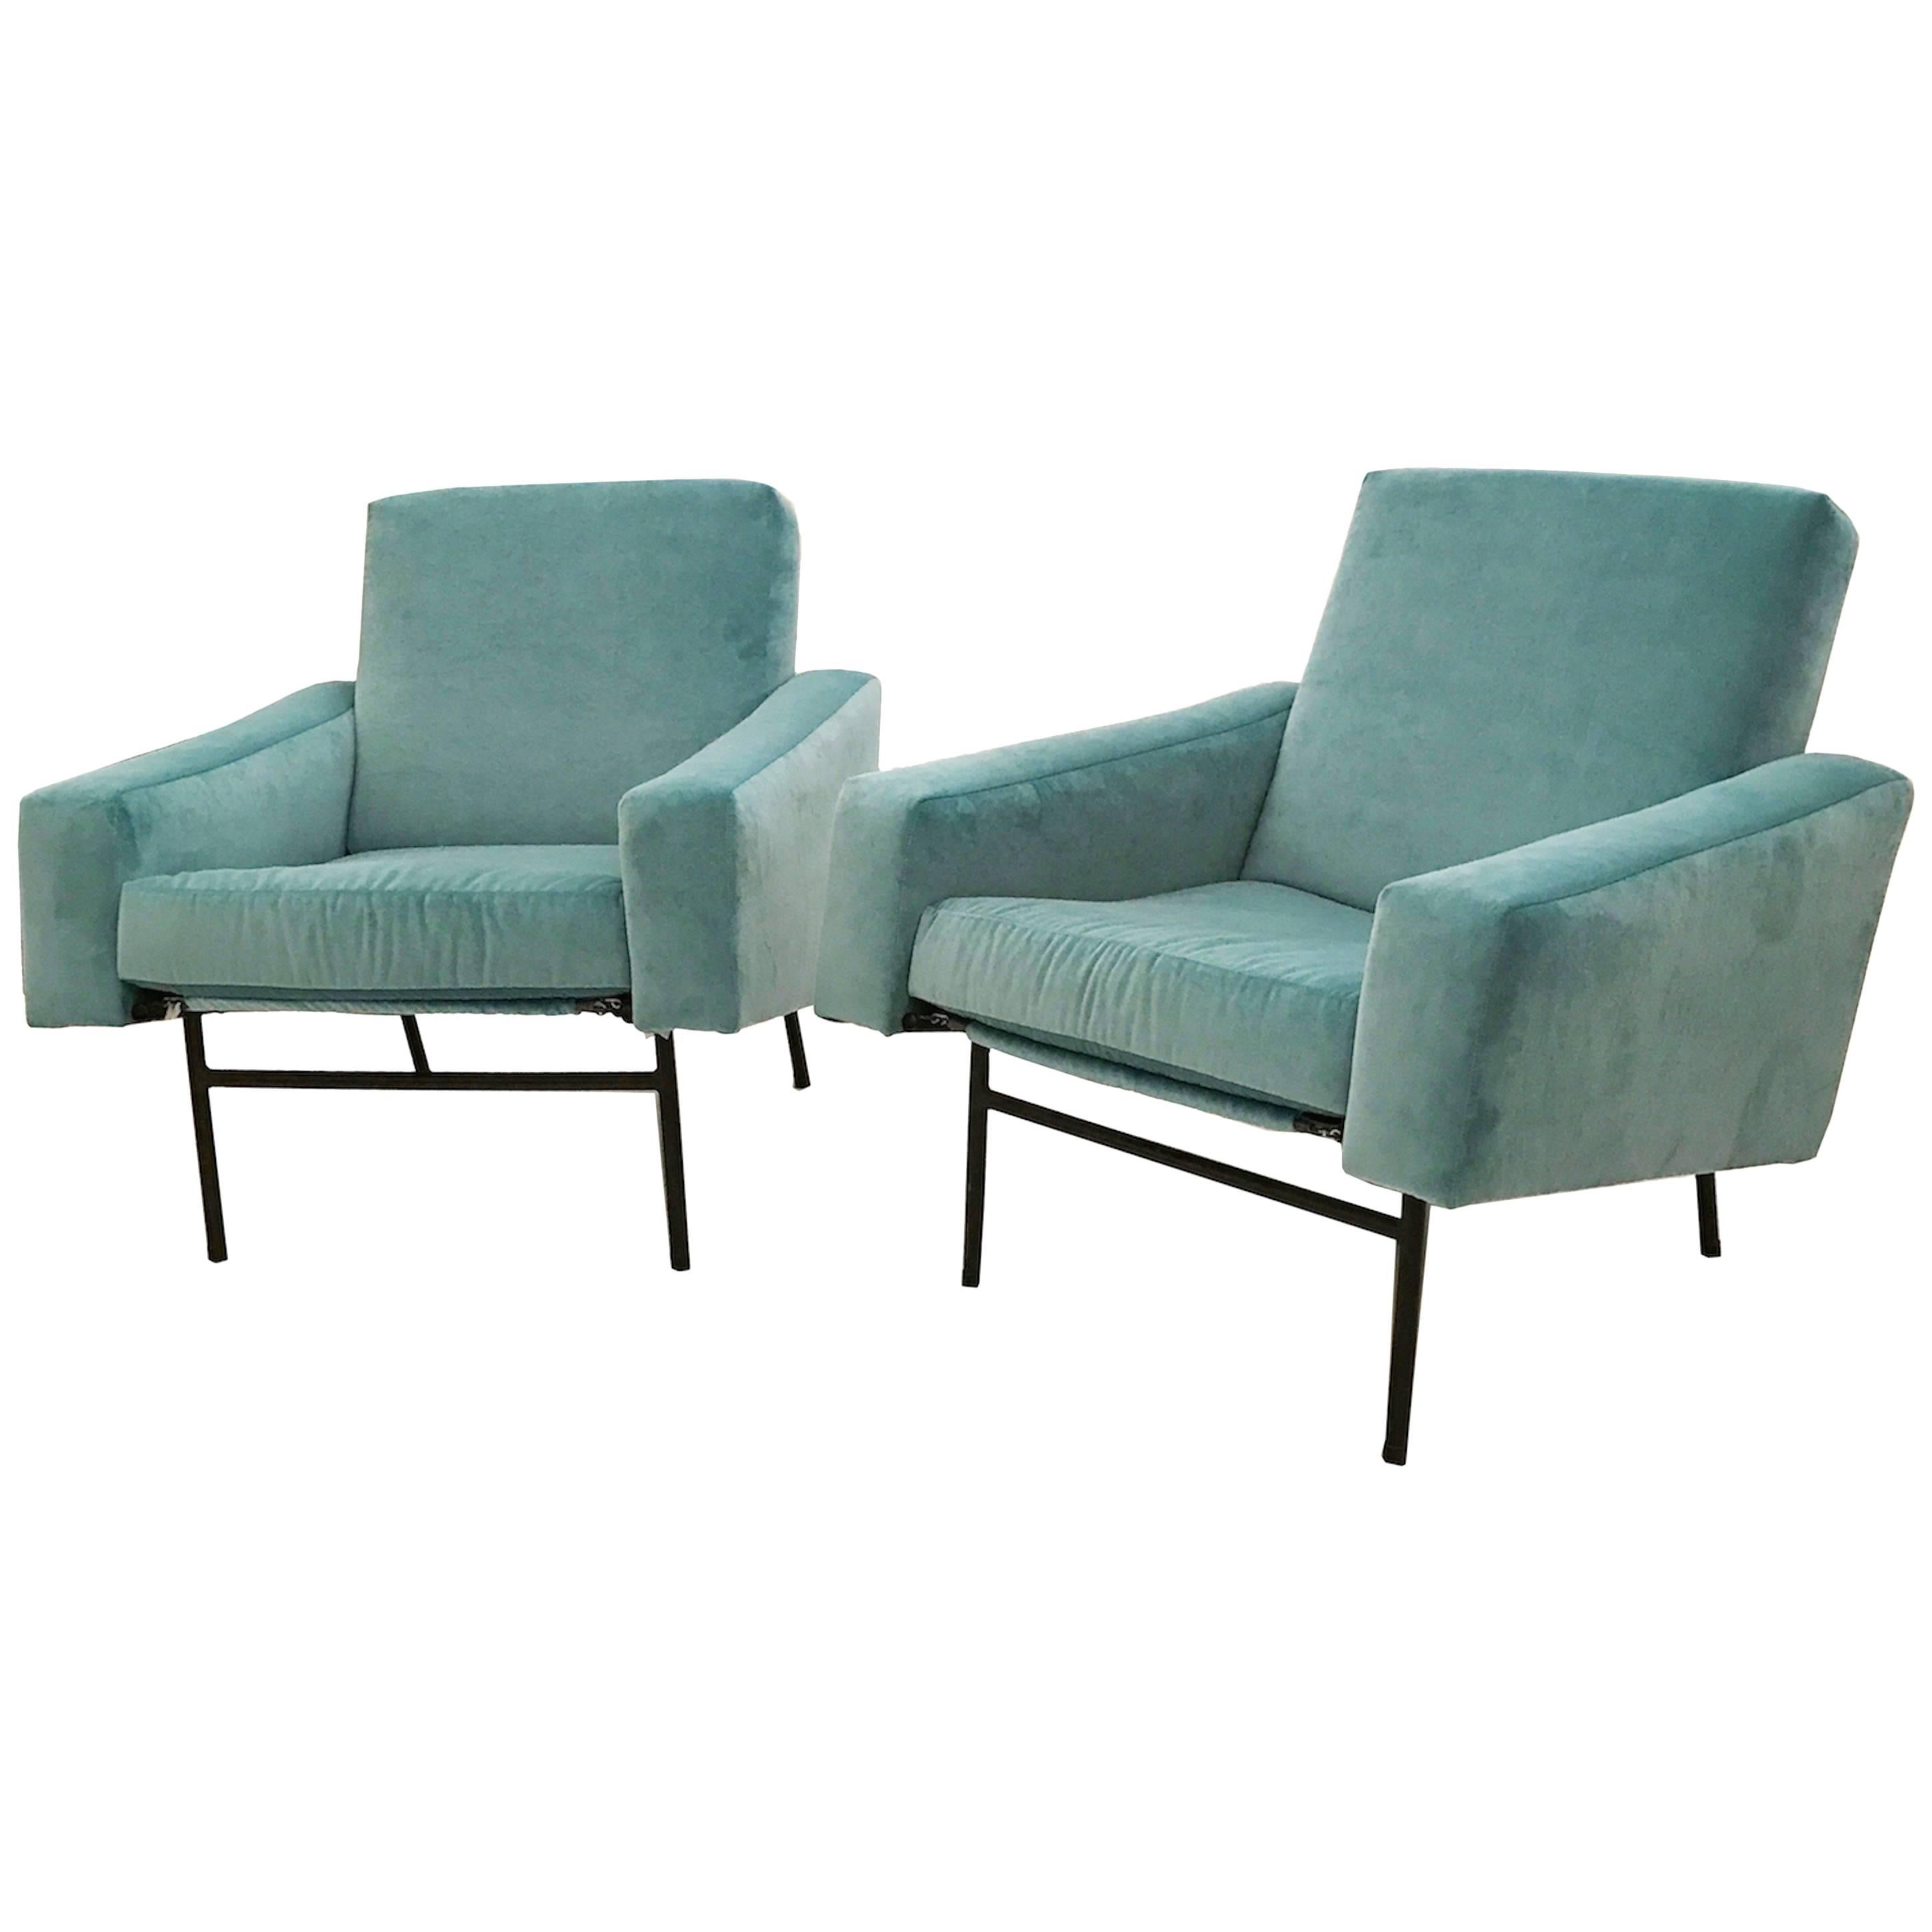 Pierre Guariche Pair of Mid-Century Club Chairs France, circa 1954 For Sale